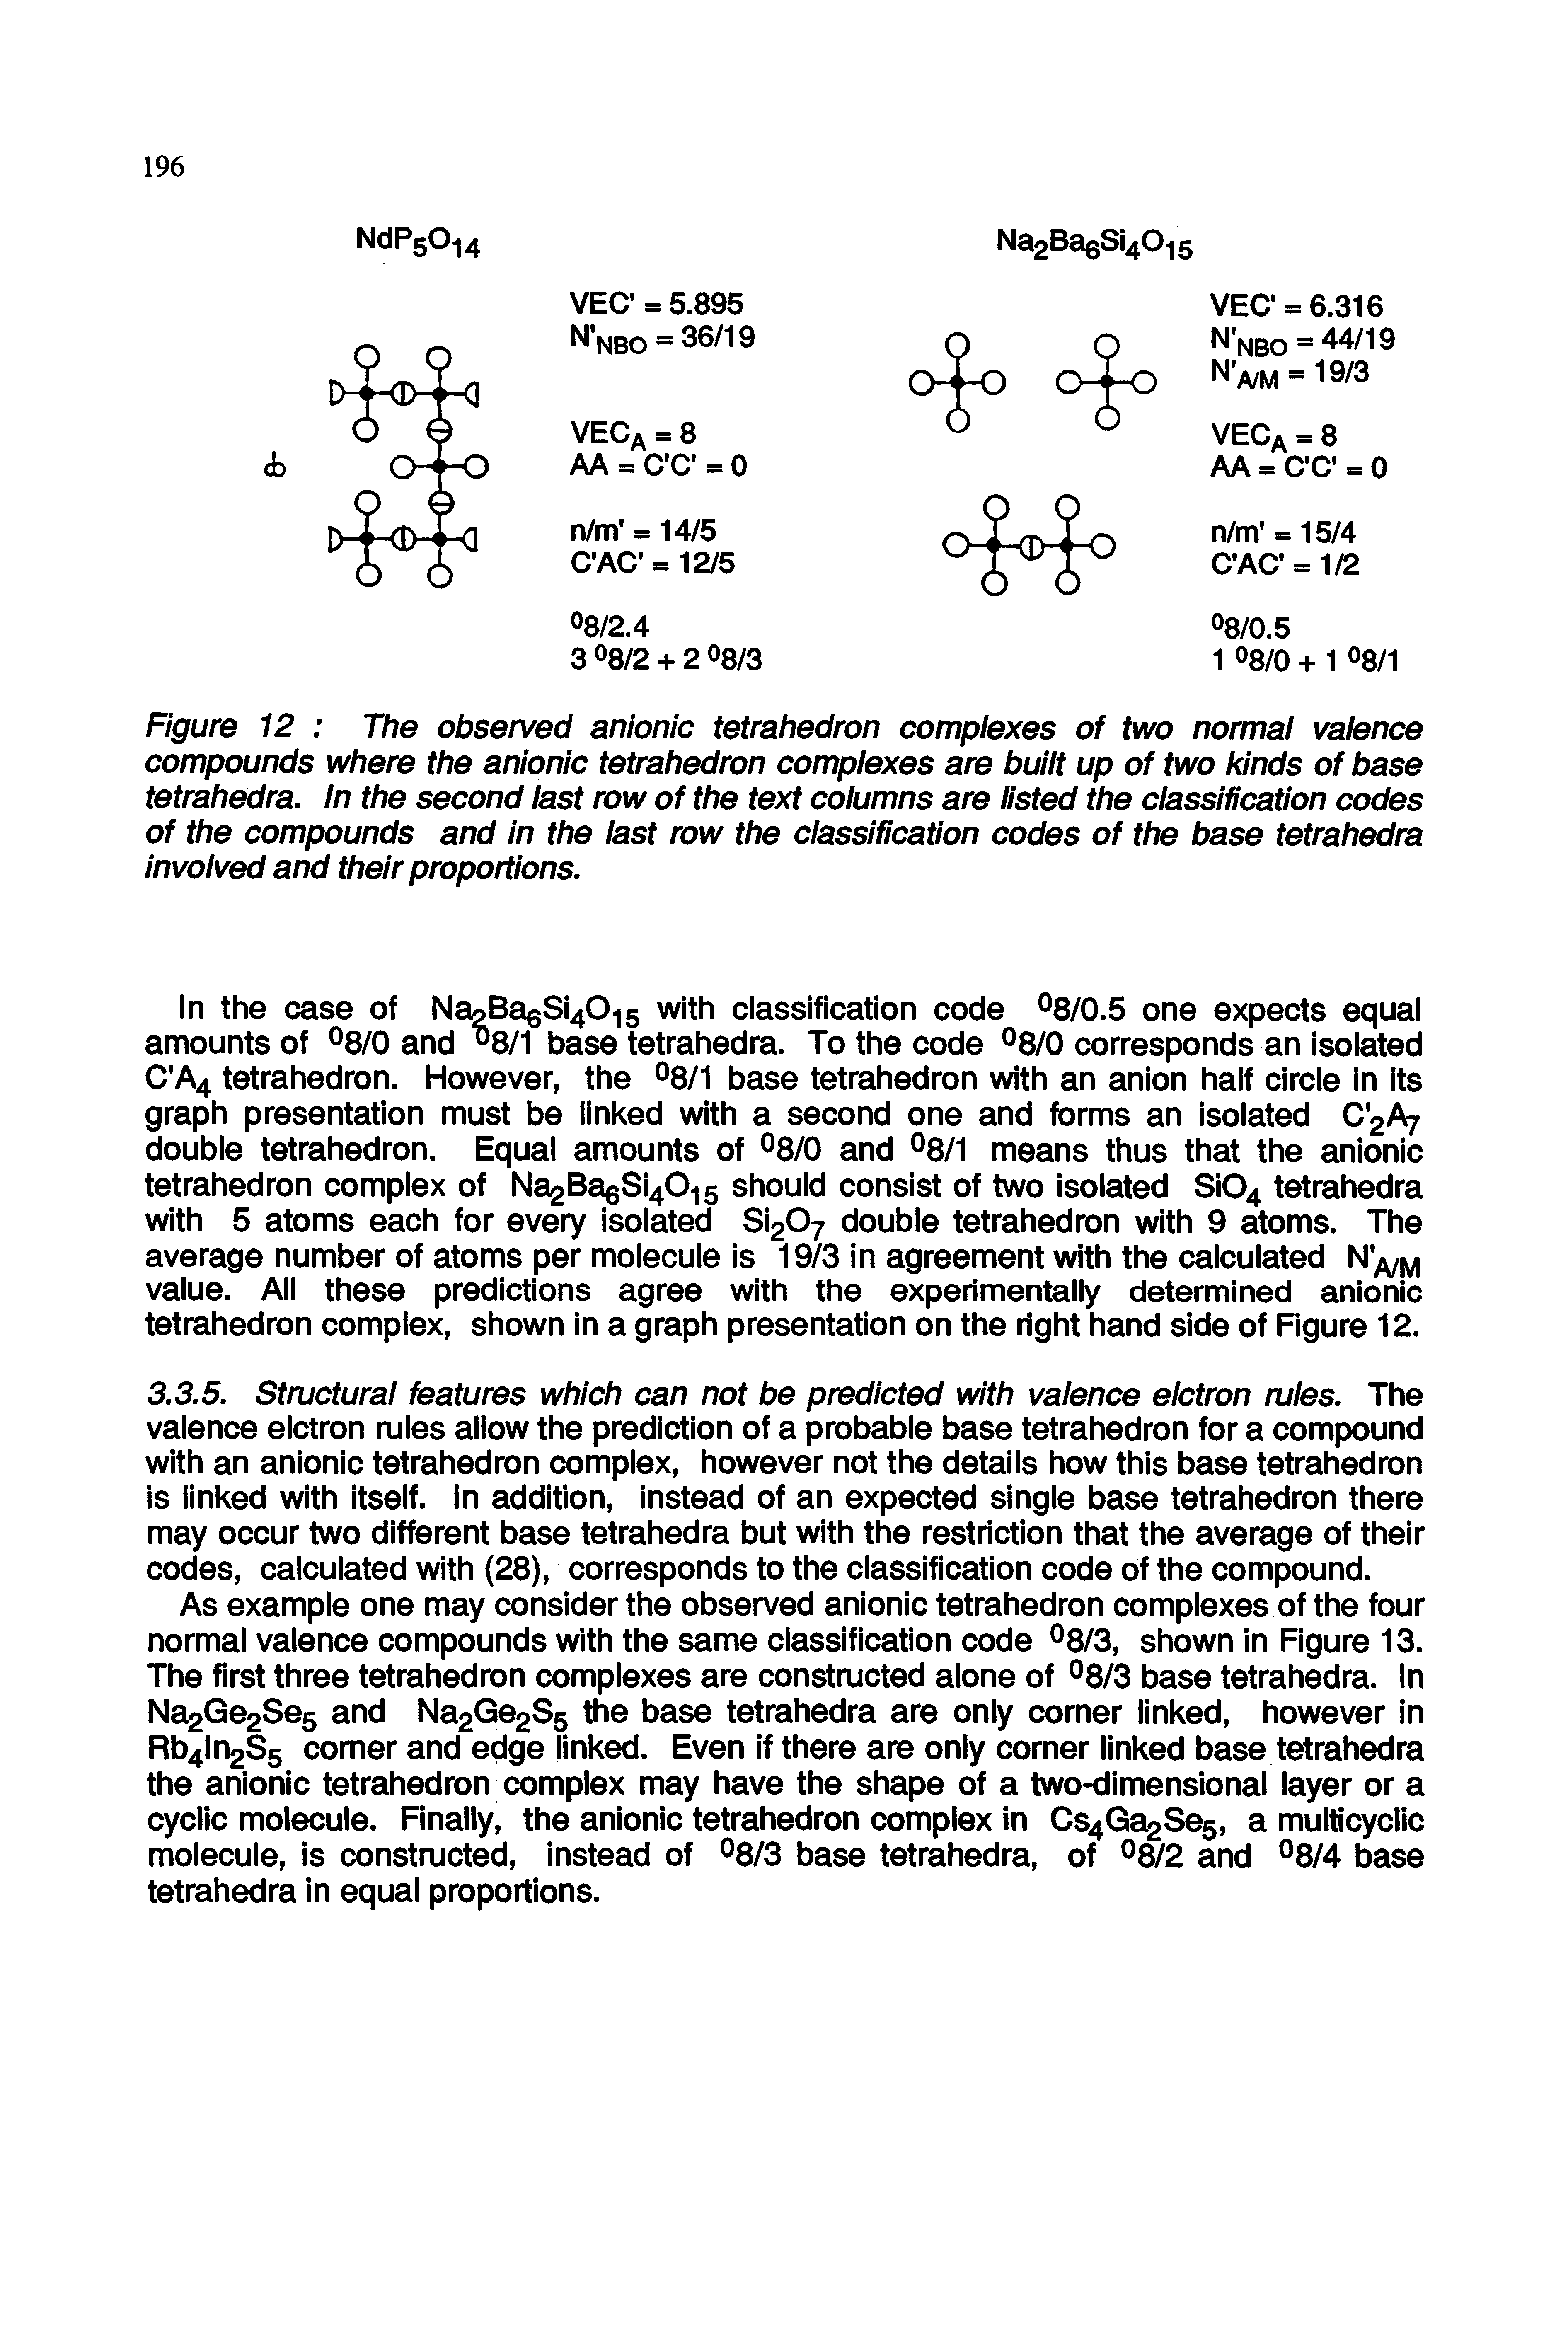 Figure 12 The observed anionic tetrahedron complexes of two normal valence compounds where the anionic tetrahedron complexes are built up of two kinds of base tetrahedra. In the second last row of the text columns are listed the classification codes of the compounds and in the last row the classification codes of the base tetrahedia involved and their proportions.